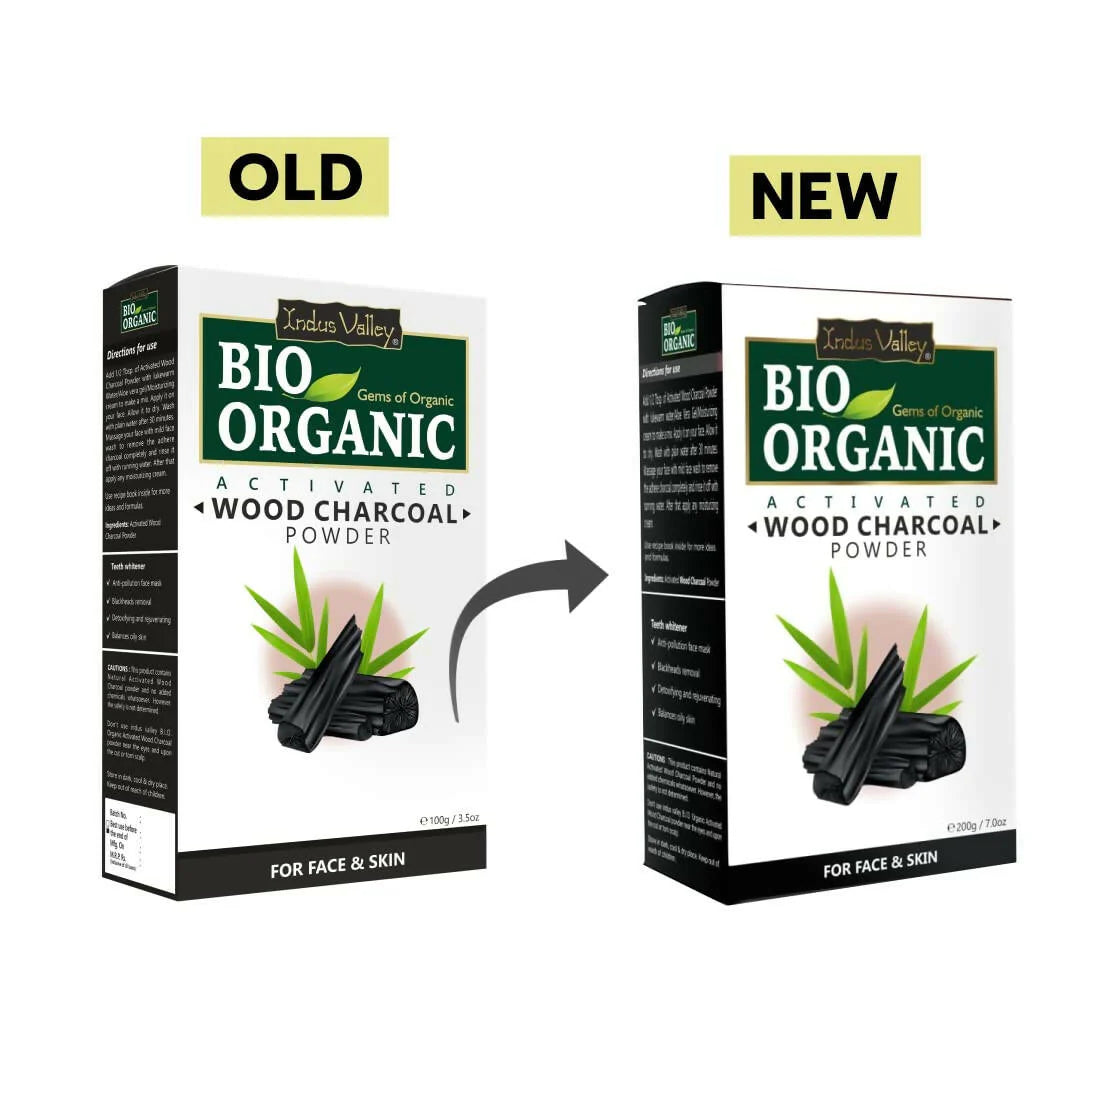 Indus Valley Bio Organic Activated Wood Charcoal Powder